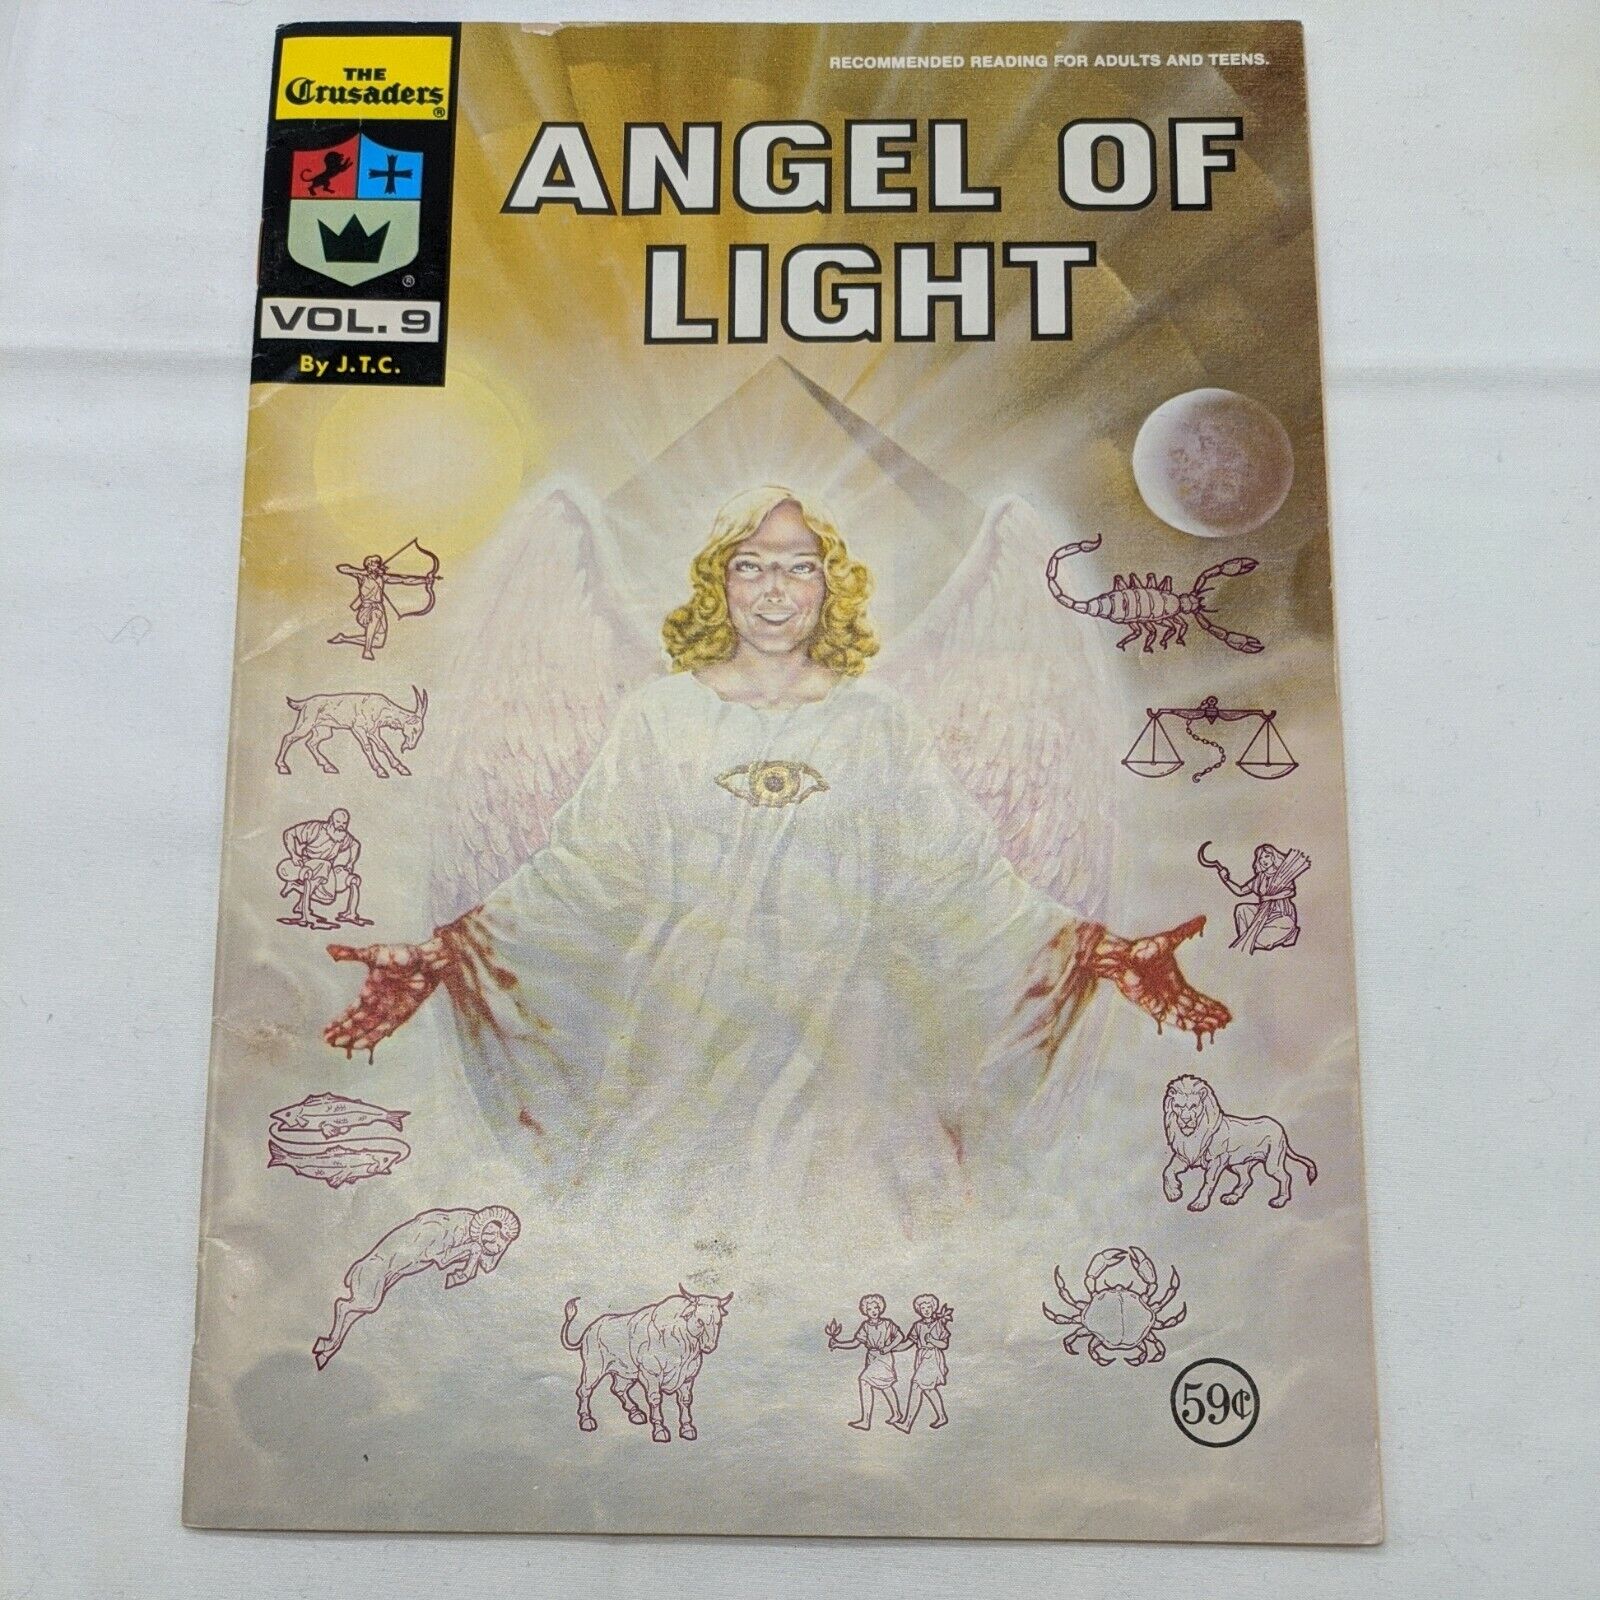 The Crusaders Angel Of Light Vol 9 Comic Book By J T C